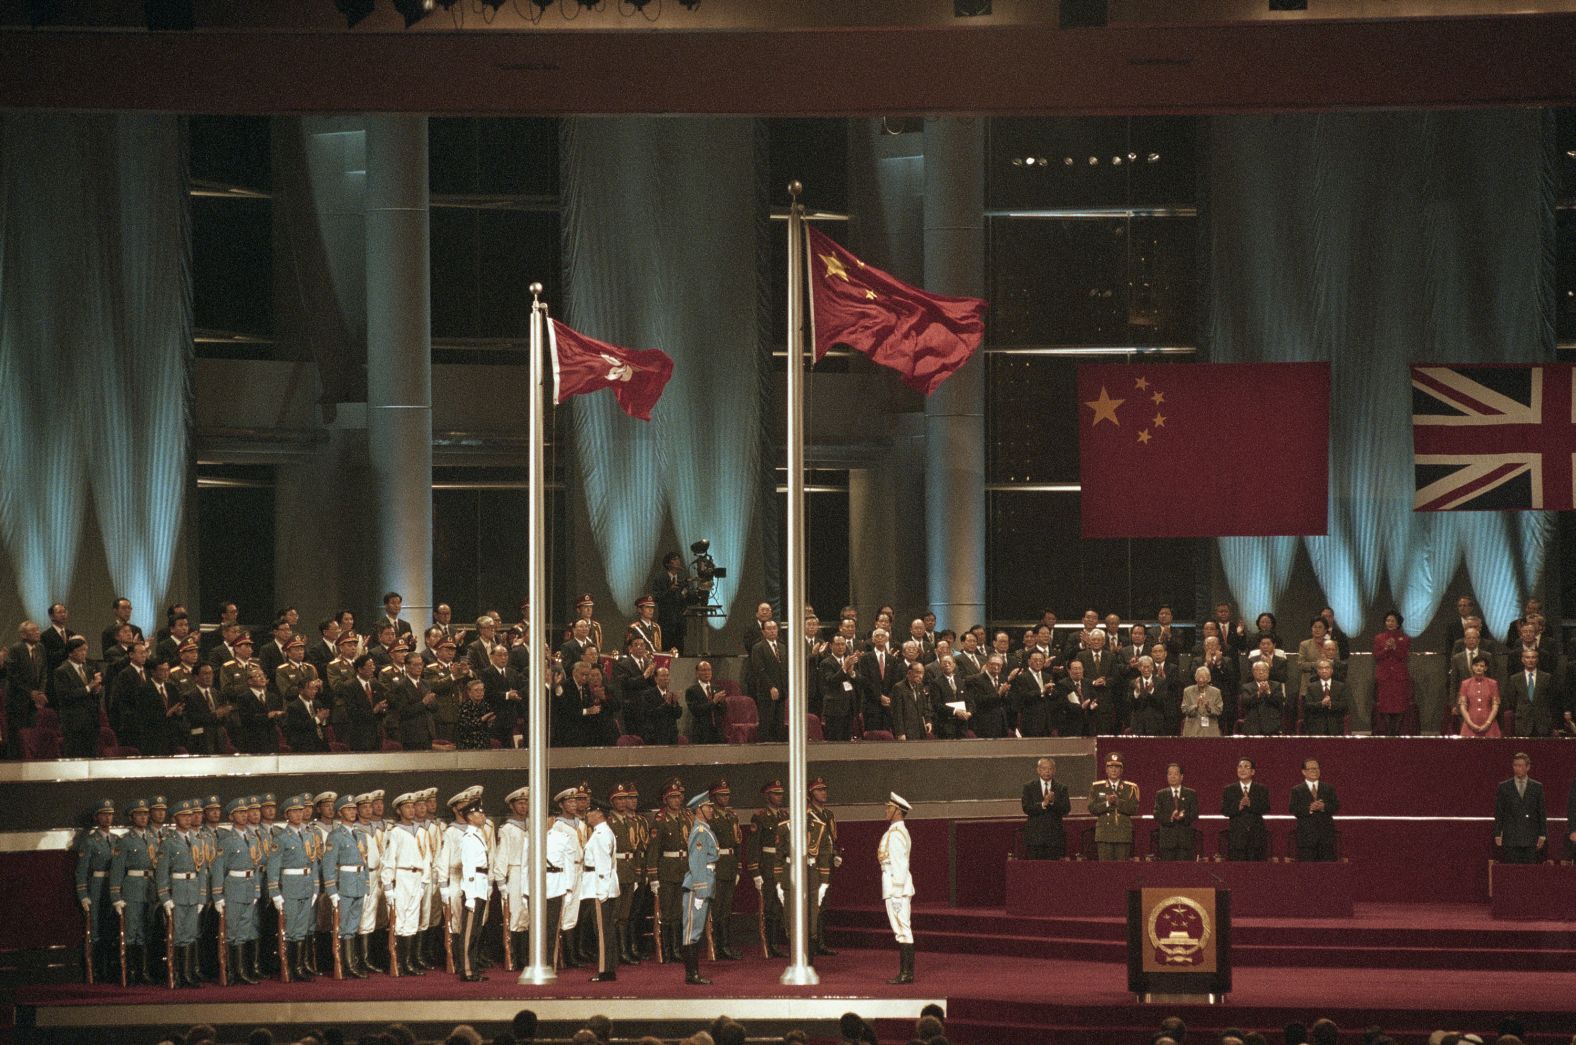 A ceremony is held for the Hong Kong handover on July 1, 1997.